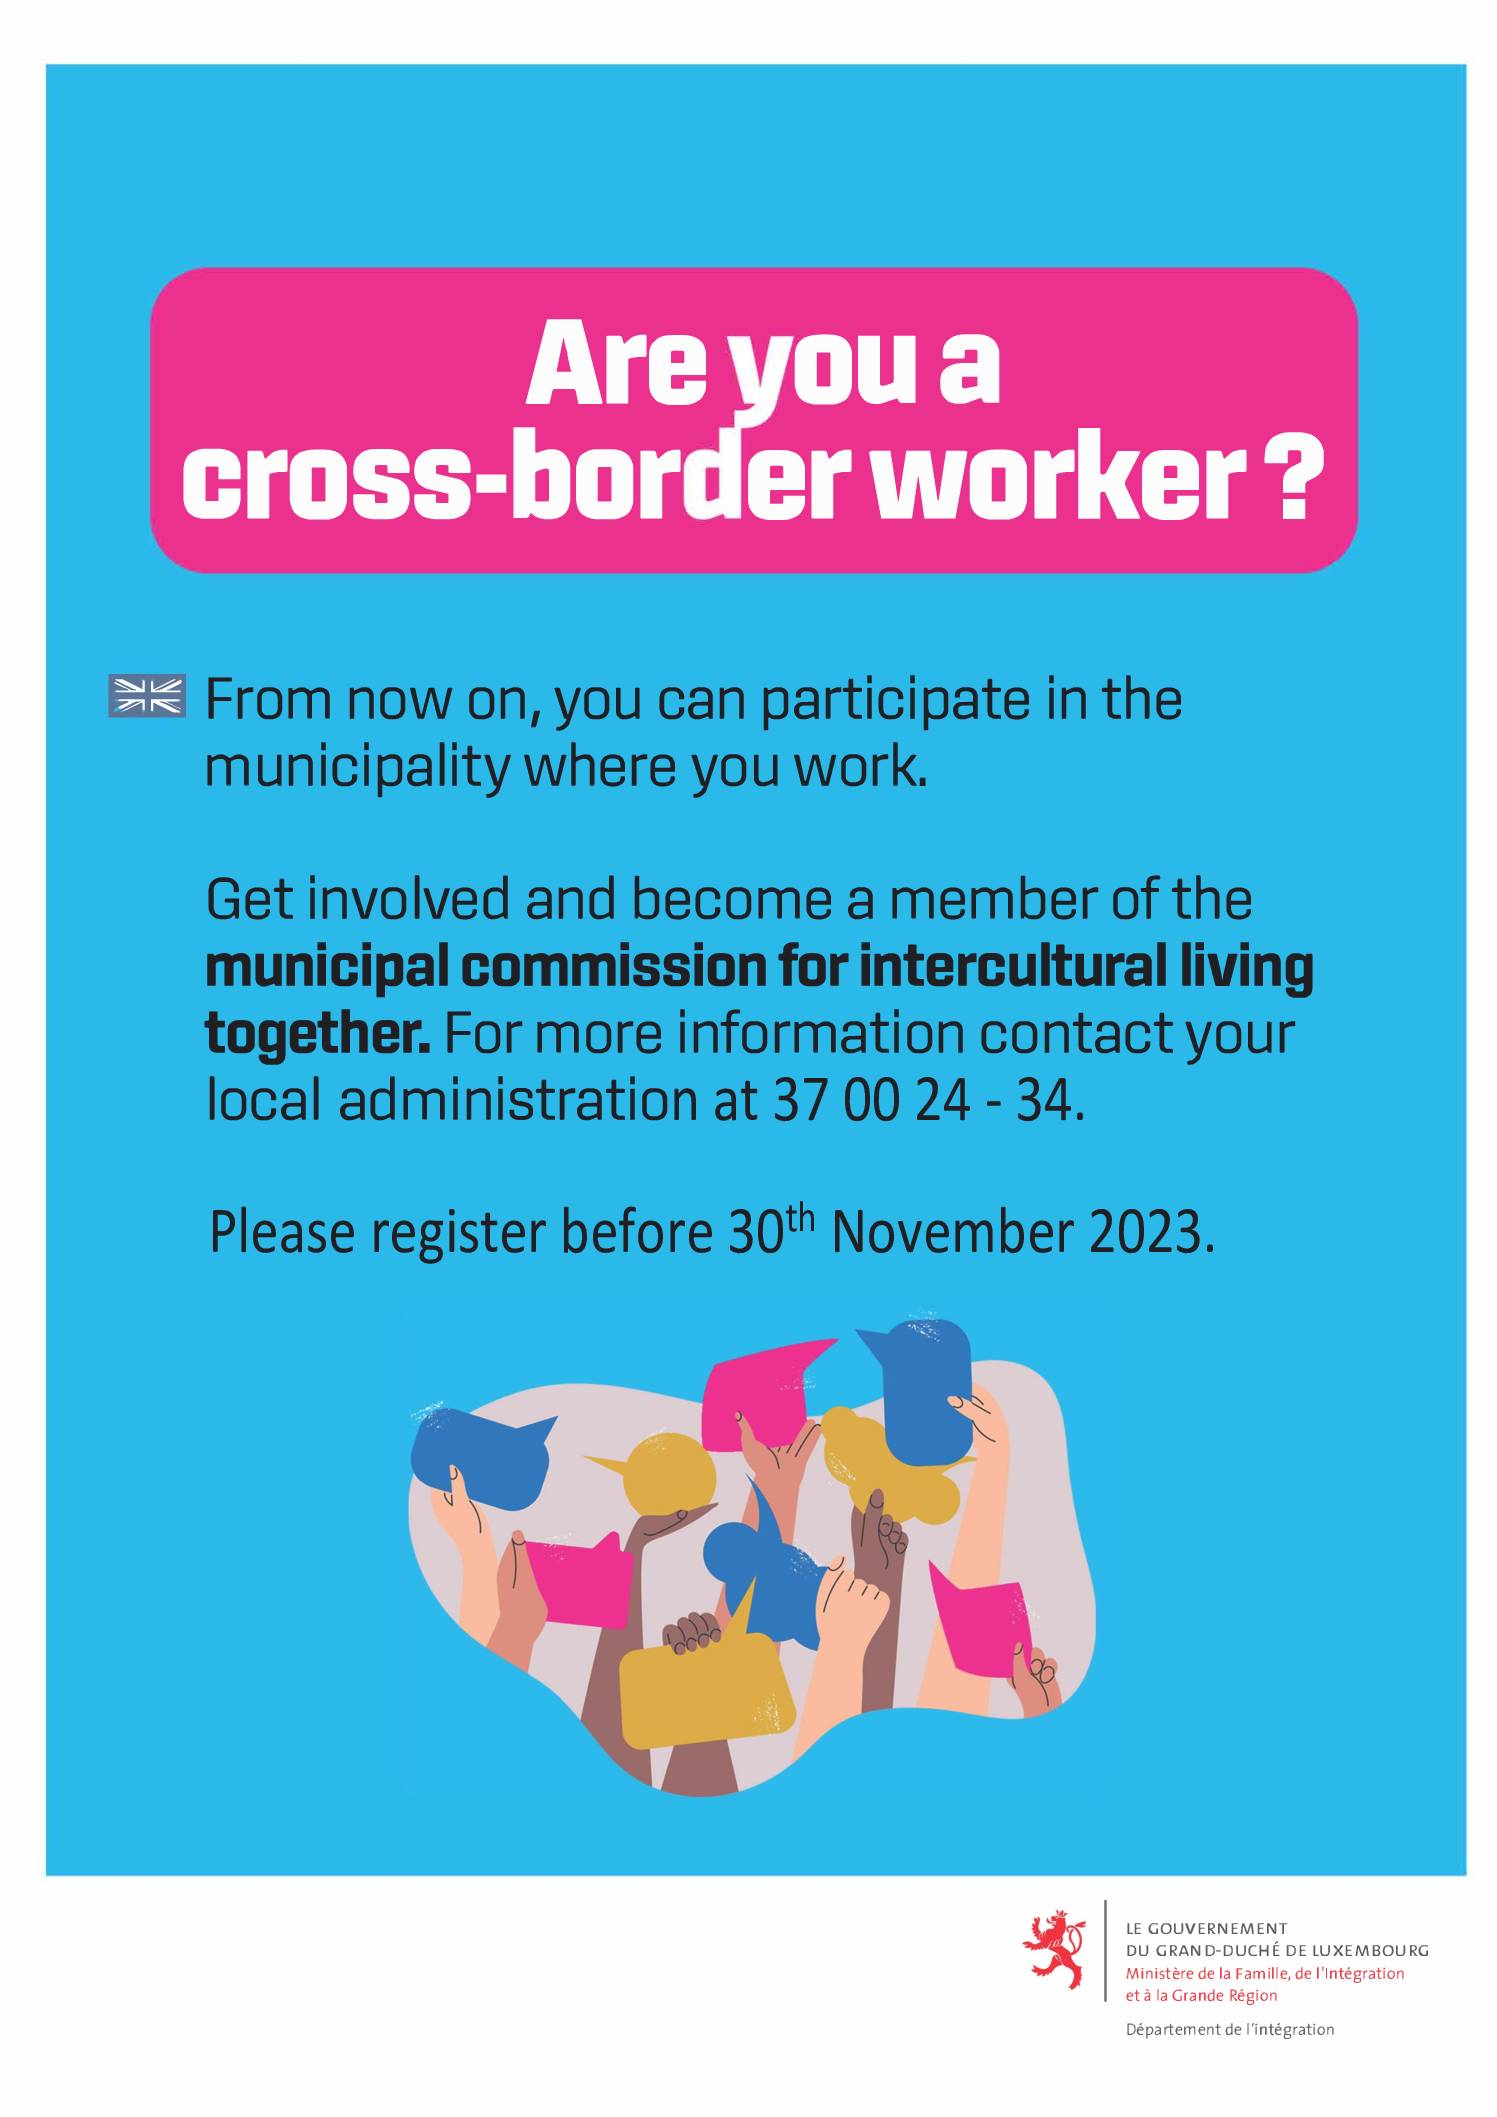 Are you a cross-border worker?